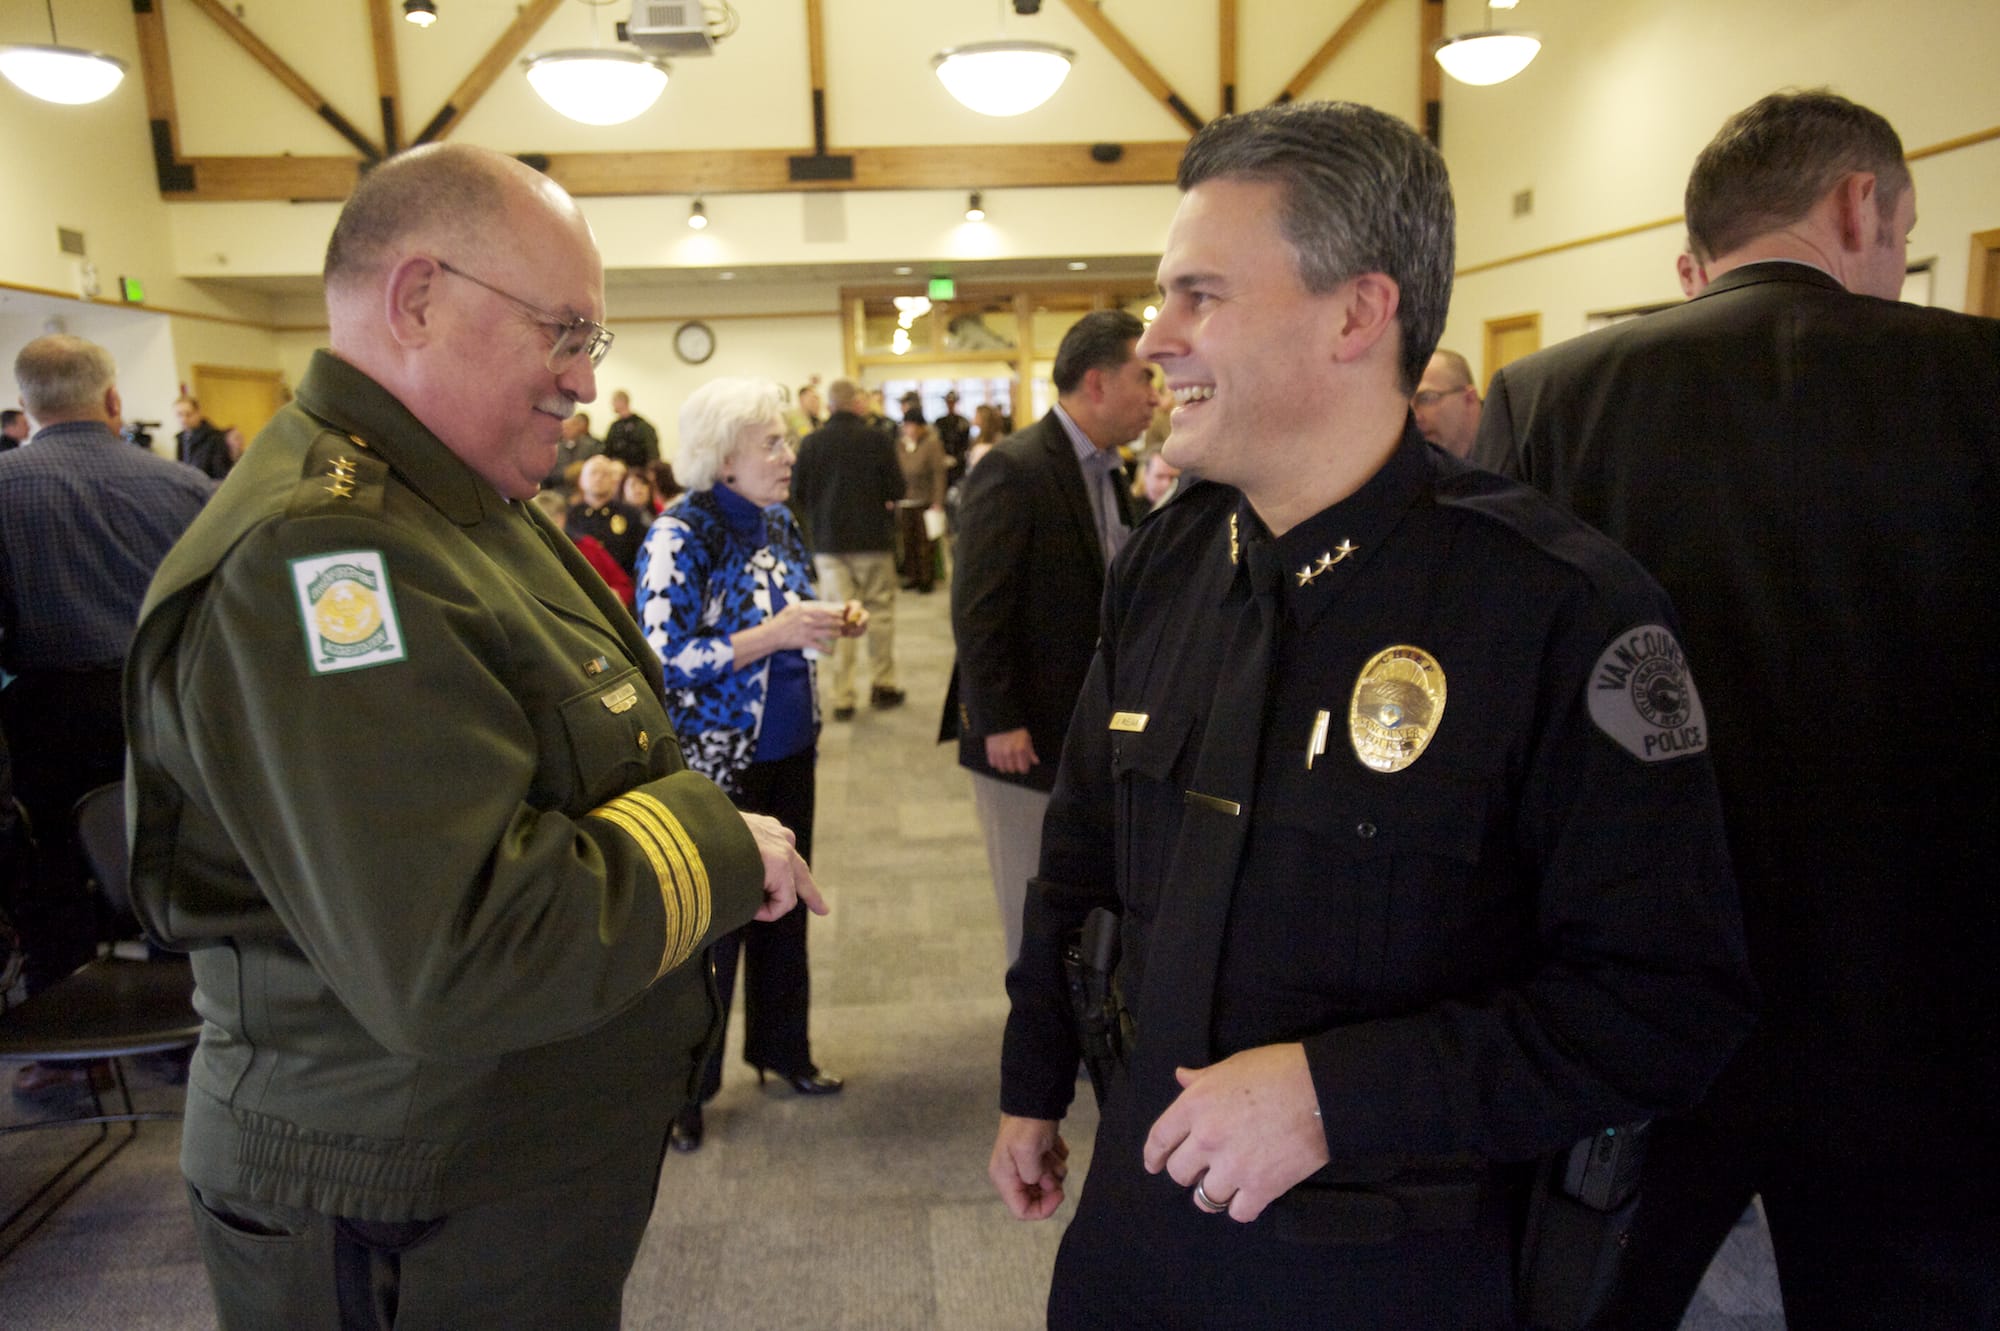 Vancouver Police Chief James McElvain talks with Clark County Sheriff Garry Lucas during a ceremony Thursday at the Water Resources Center in Vancouver.